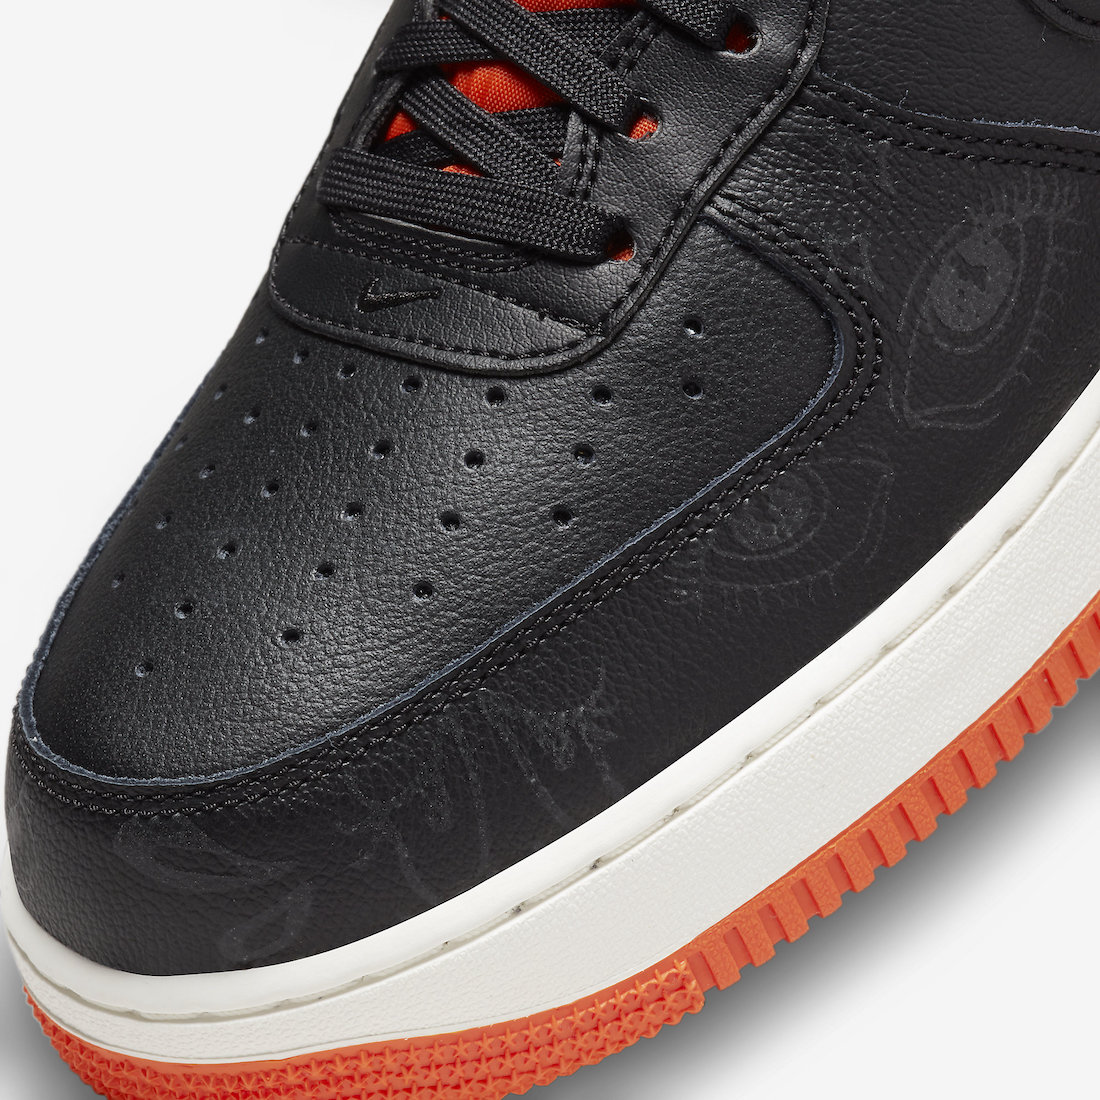 Nike-Air-Force-1-Low-Halloween-DC8891-001-2021-Release-Date-6